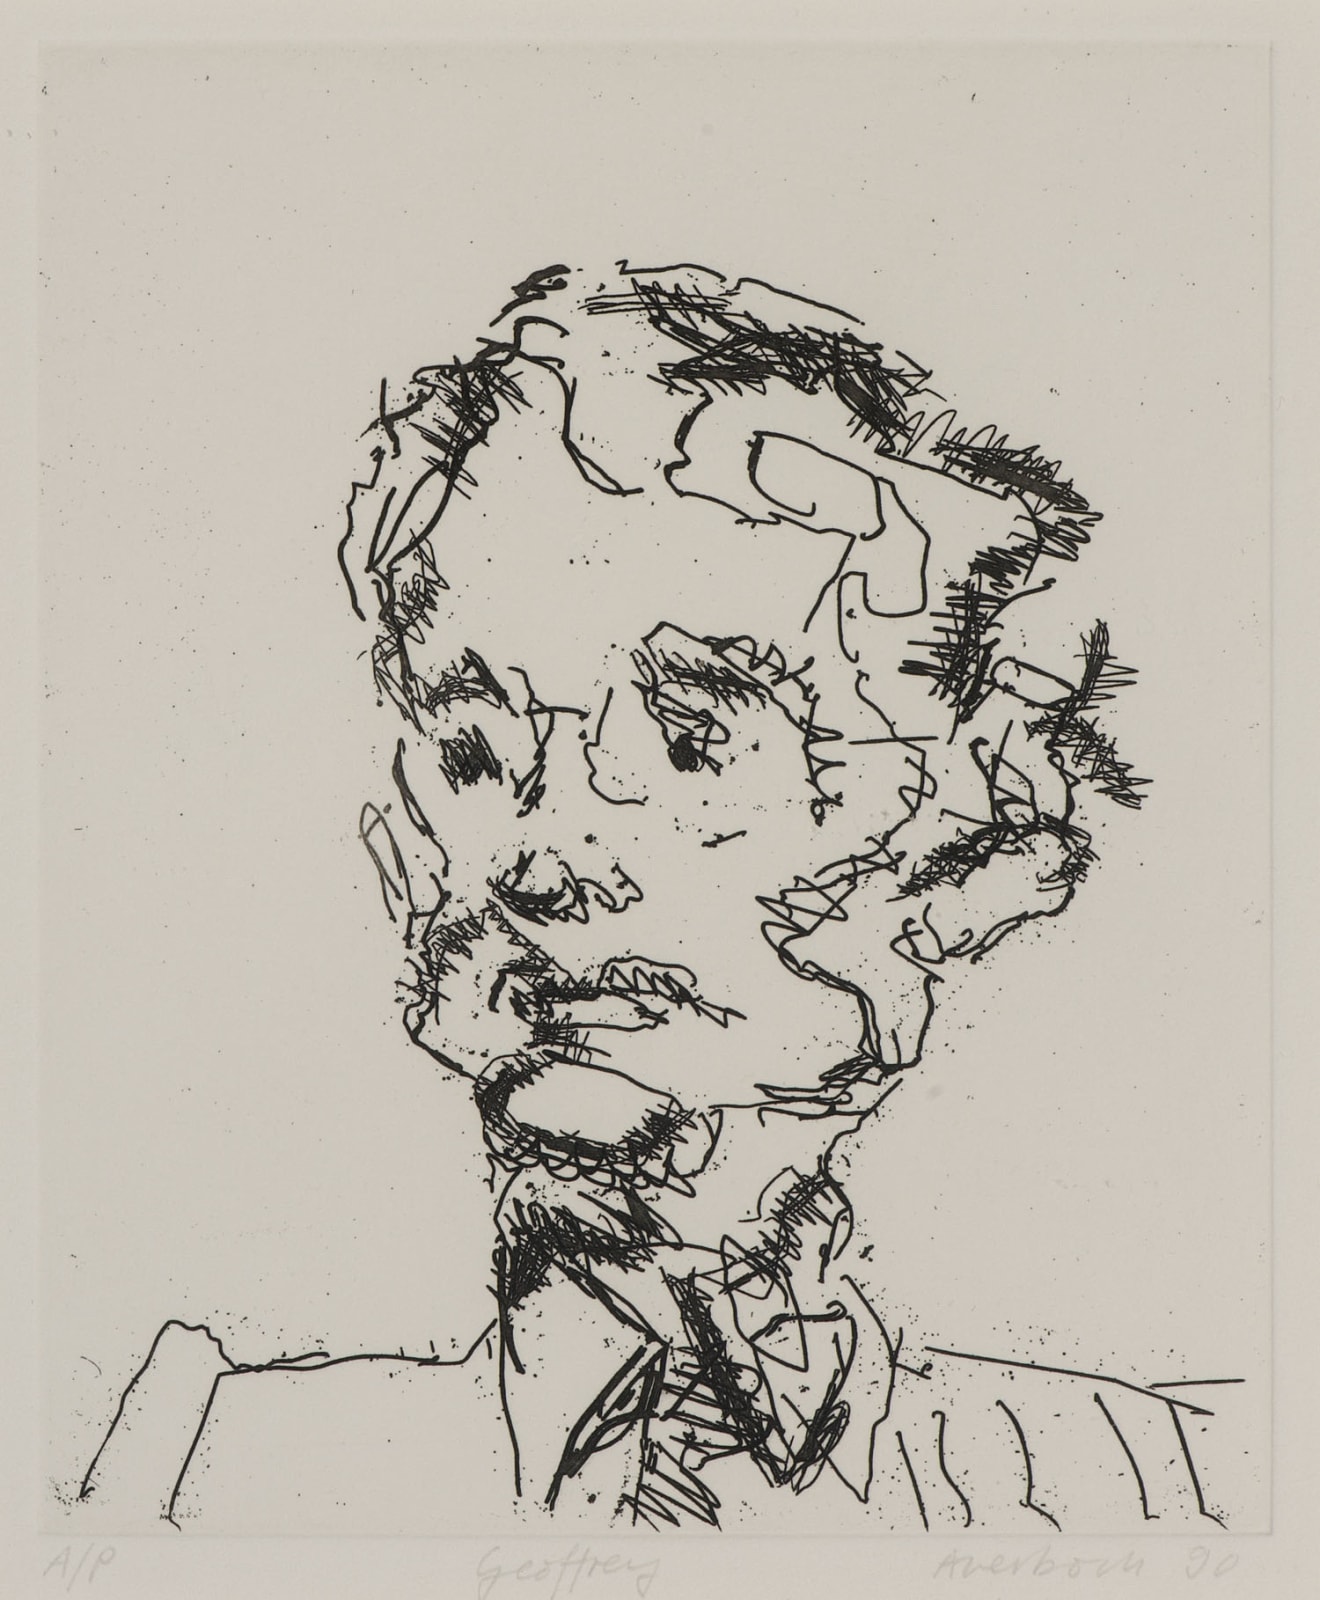 Frank Auerbach (1931-) Geoffrey, Series: Part of Seven Portraits 1990 Etching, printed on Somerset white paper, artist's proof outside the published edition of 50 19.5 x 16.5 cm Ben Uri Collection © Frank Auerbach, courtesy Marlborough Fine Art To see and discover more about this artist click here